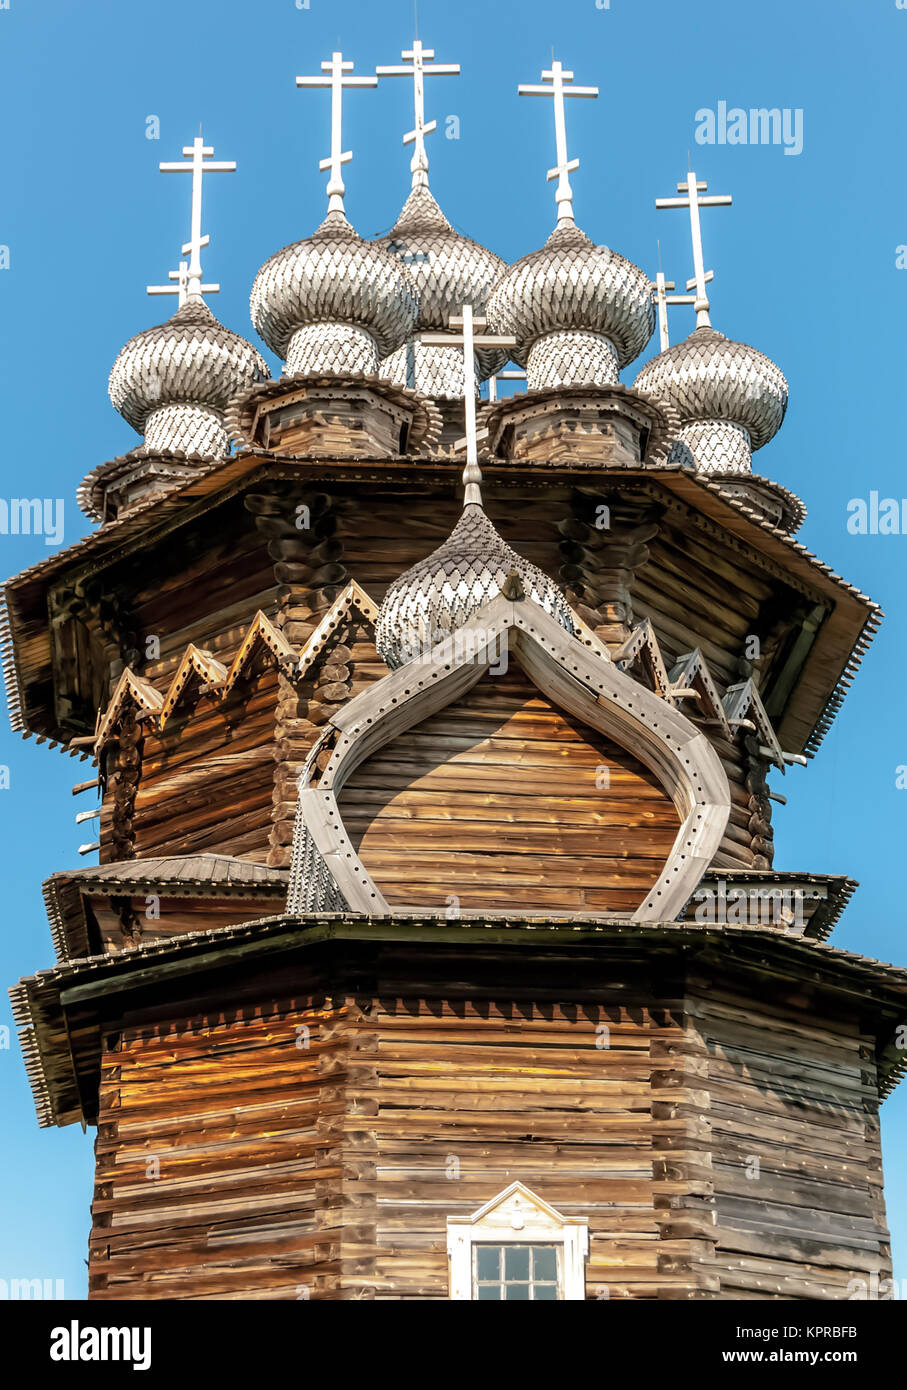 Wooden Onion Dome Stock Photo